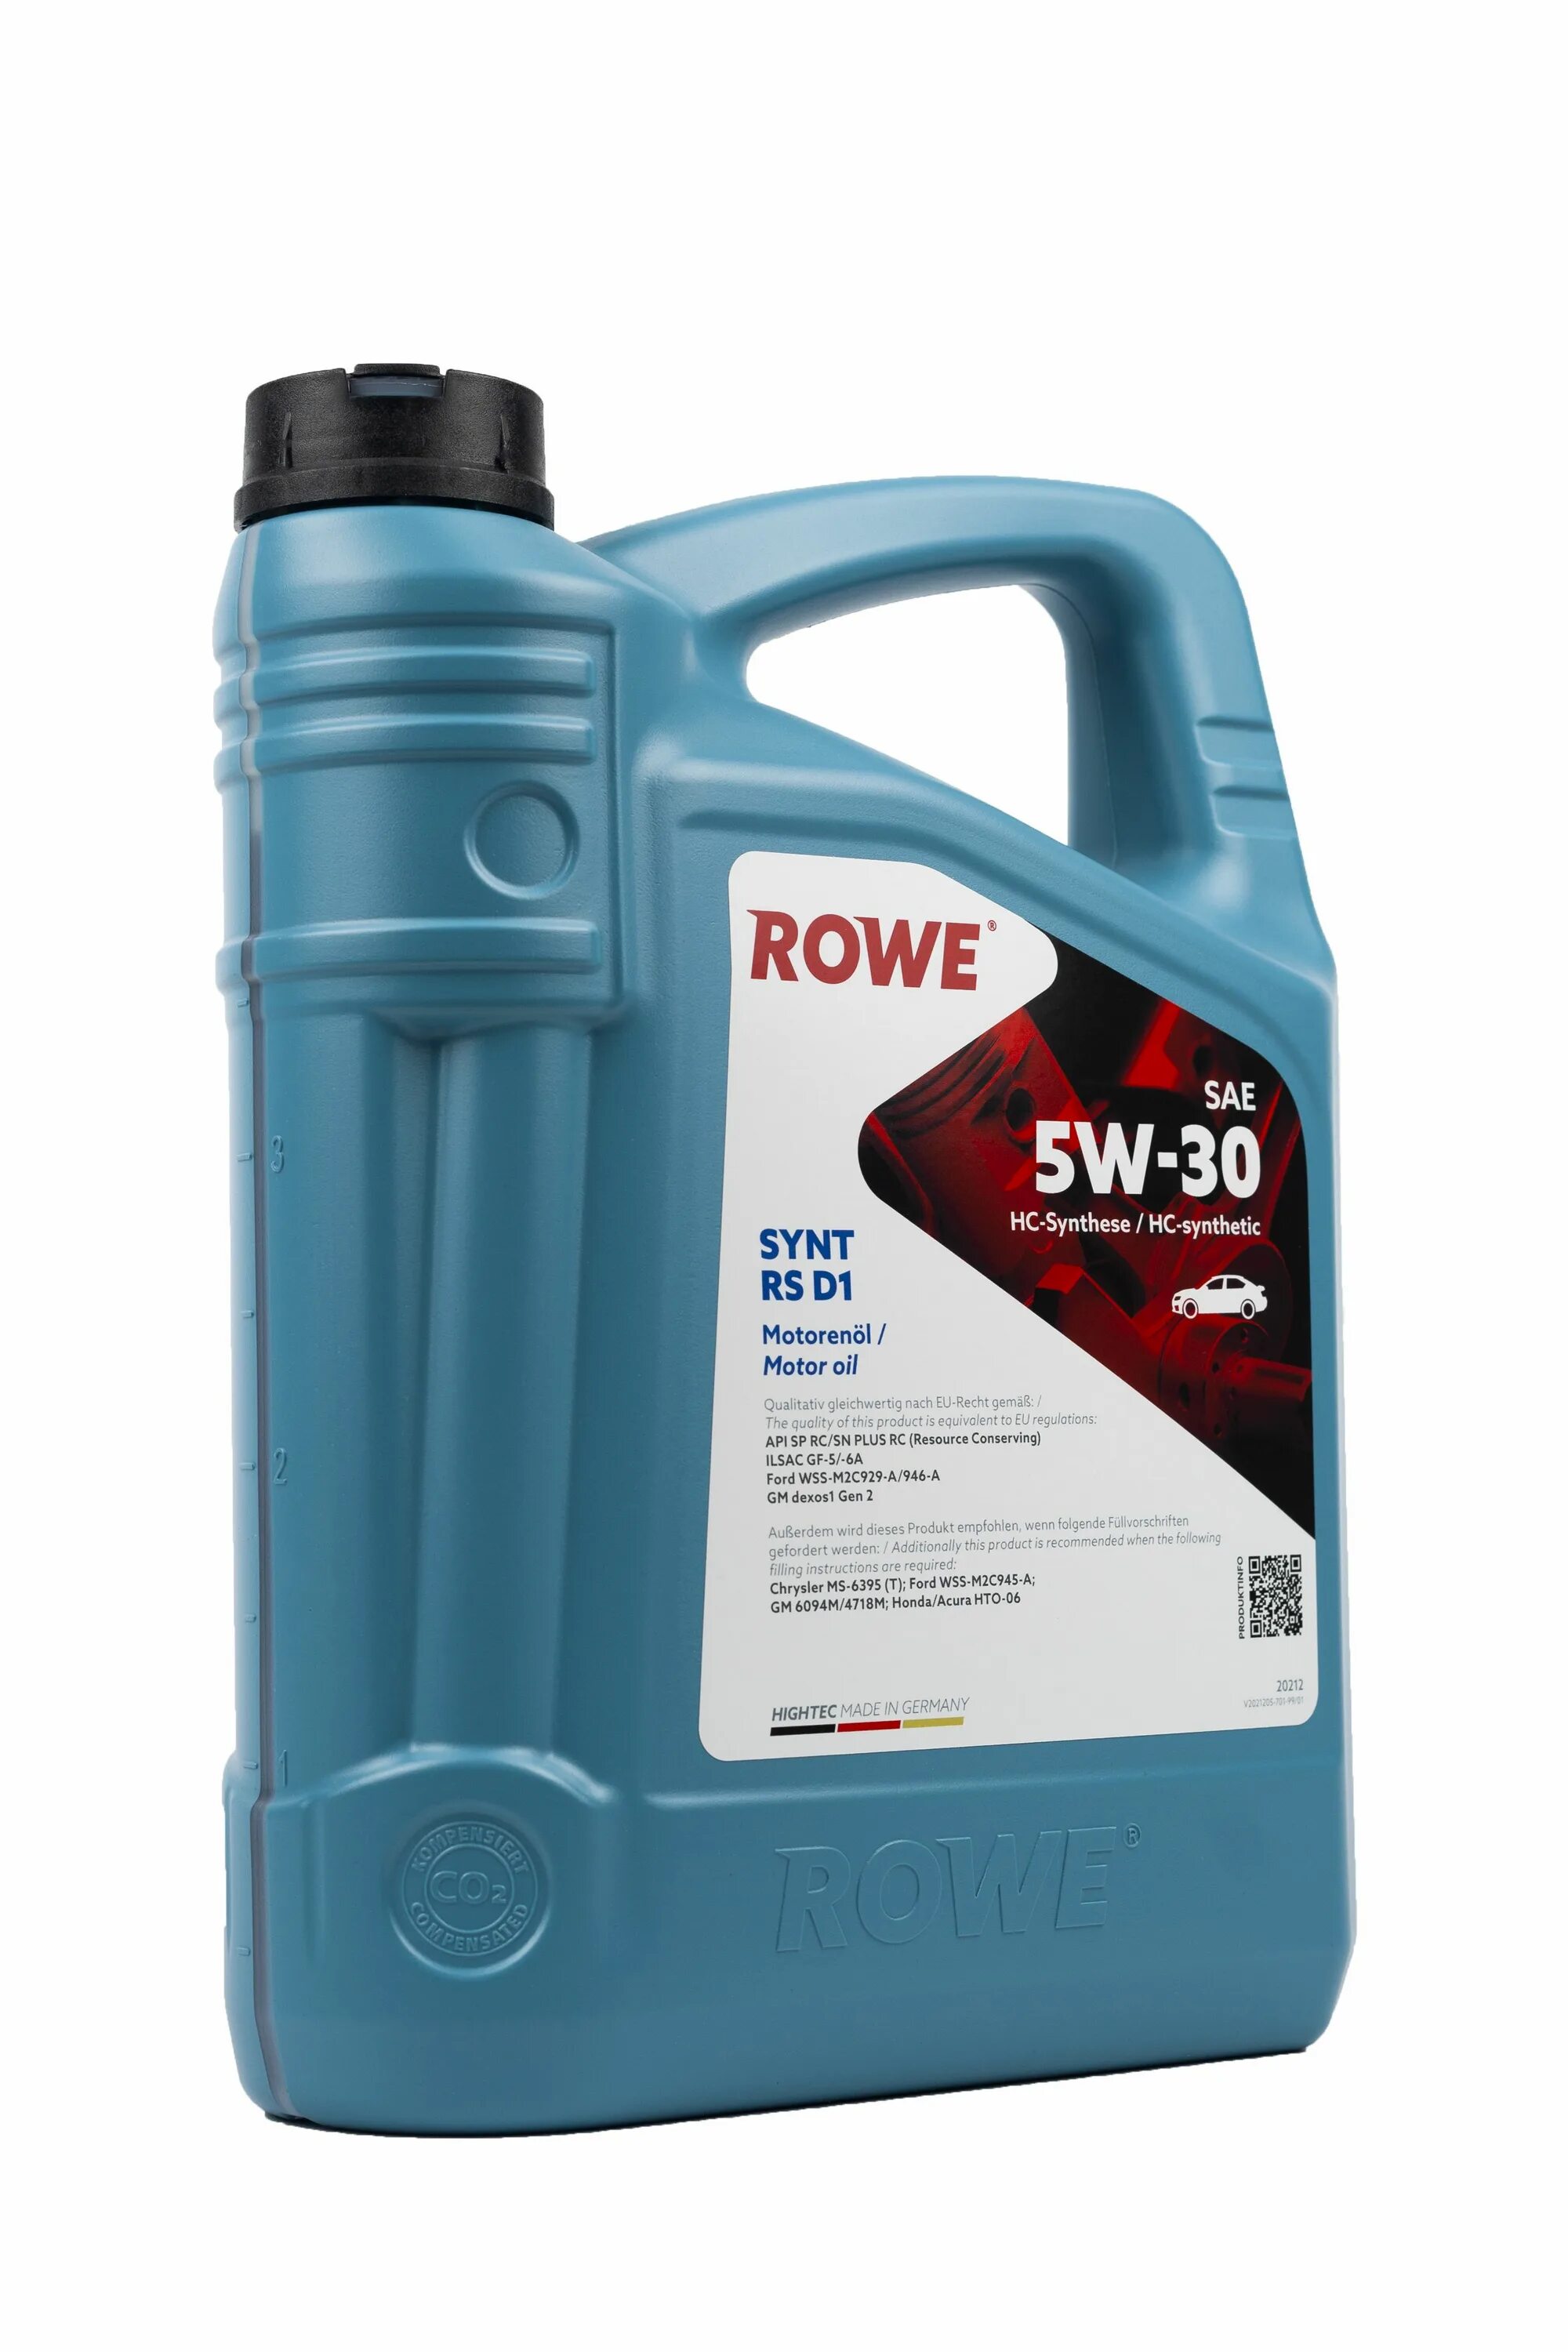 Rowe 5w30 Synt. Synt RS d1 5w-30 Rowe. Hightec Synt RS d1 SAE 5w-30. Моторное масло Rowe 5w40. Масло ров 5w40